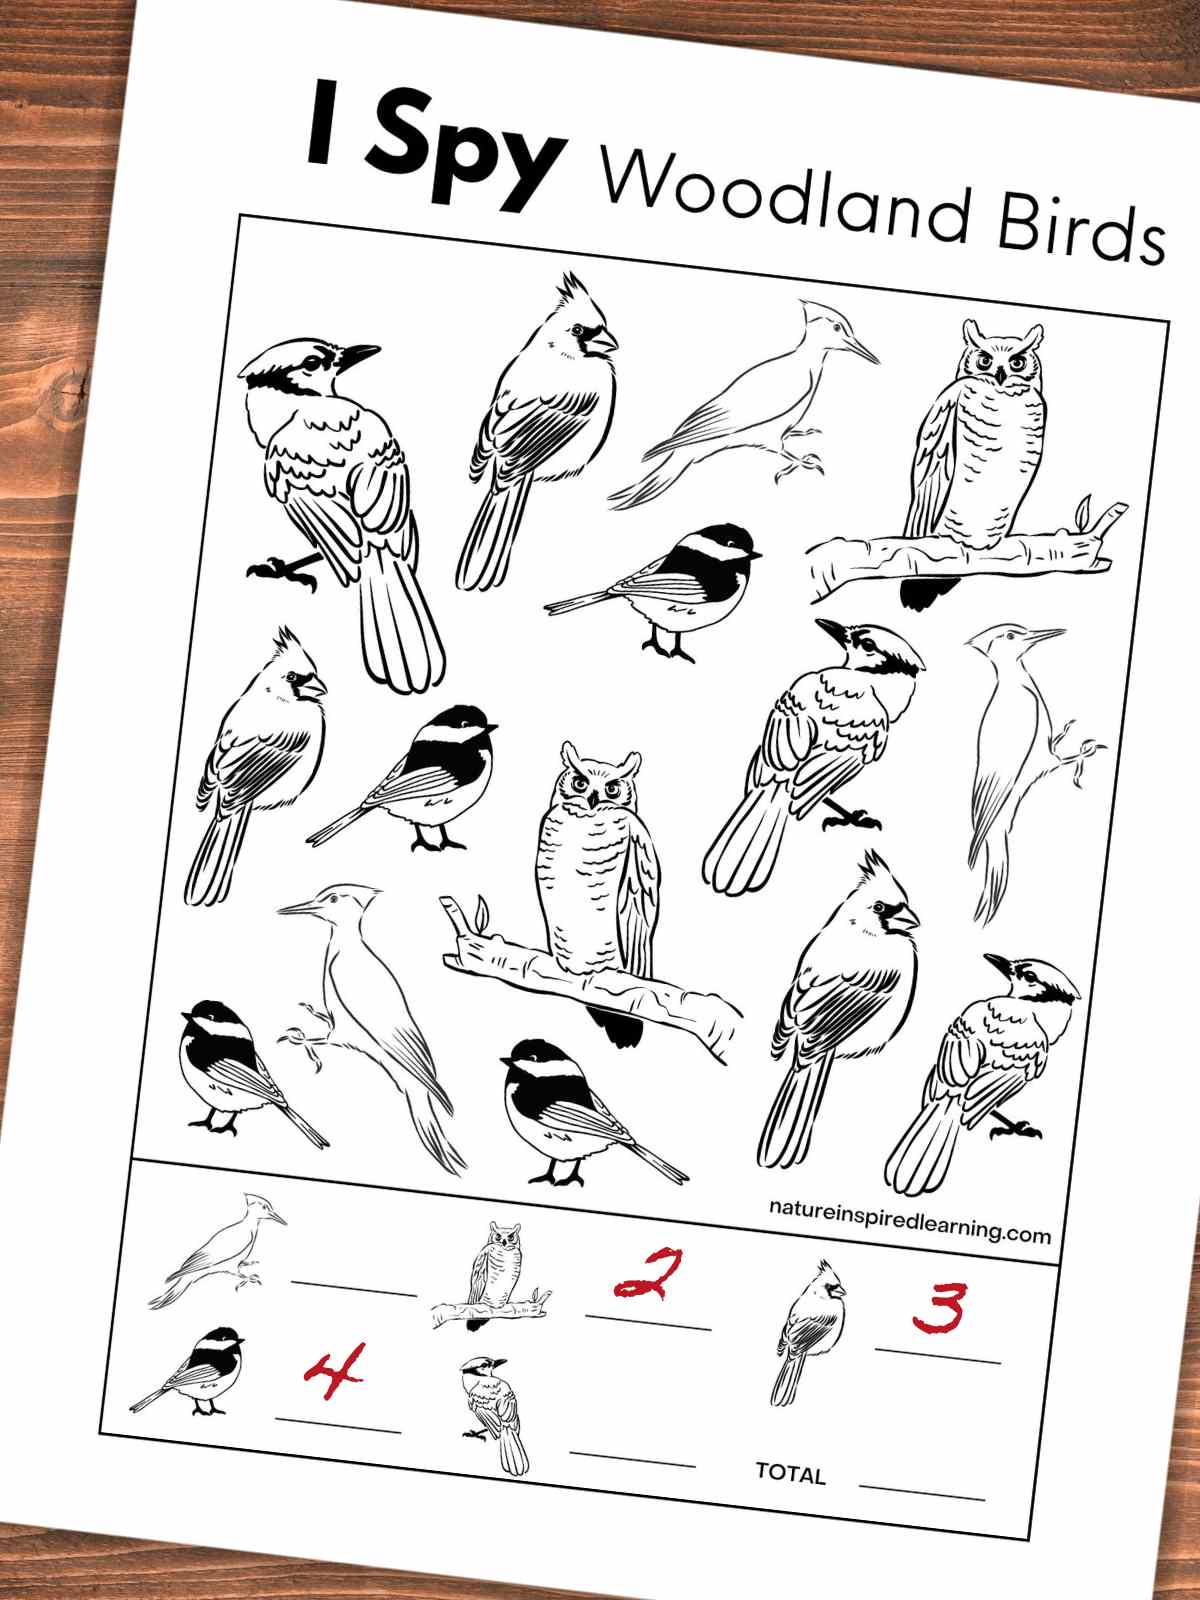 I spy woodland Bird worksheet slanted on a wooden background with different black and white birds. Red numbers on the key at the bottom.